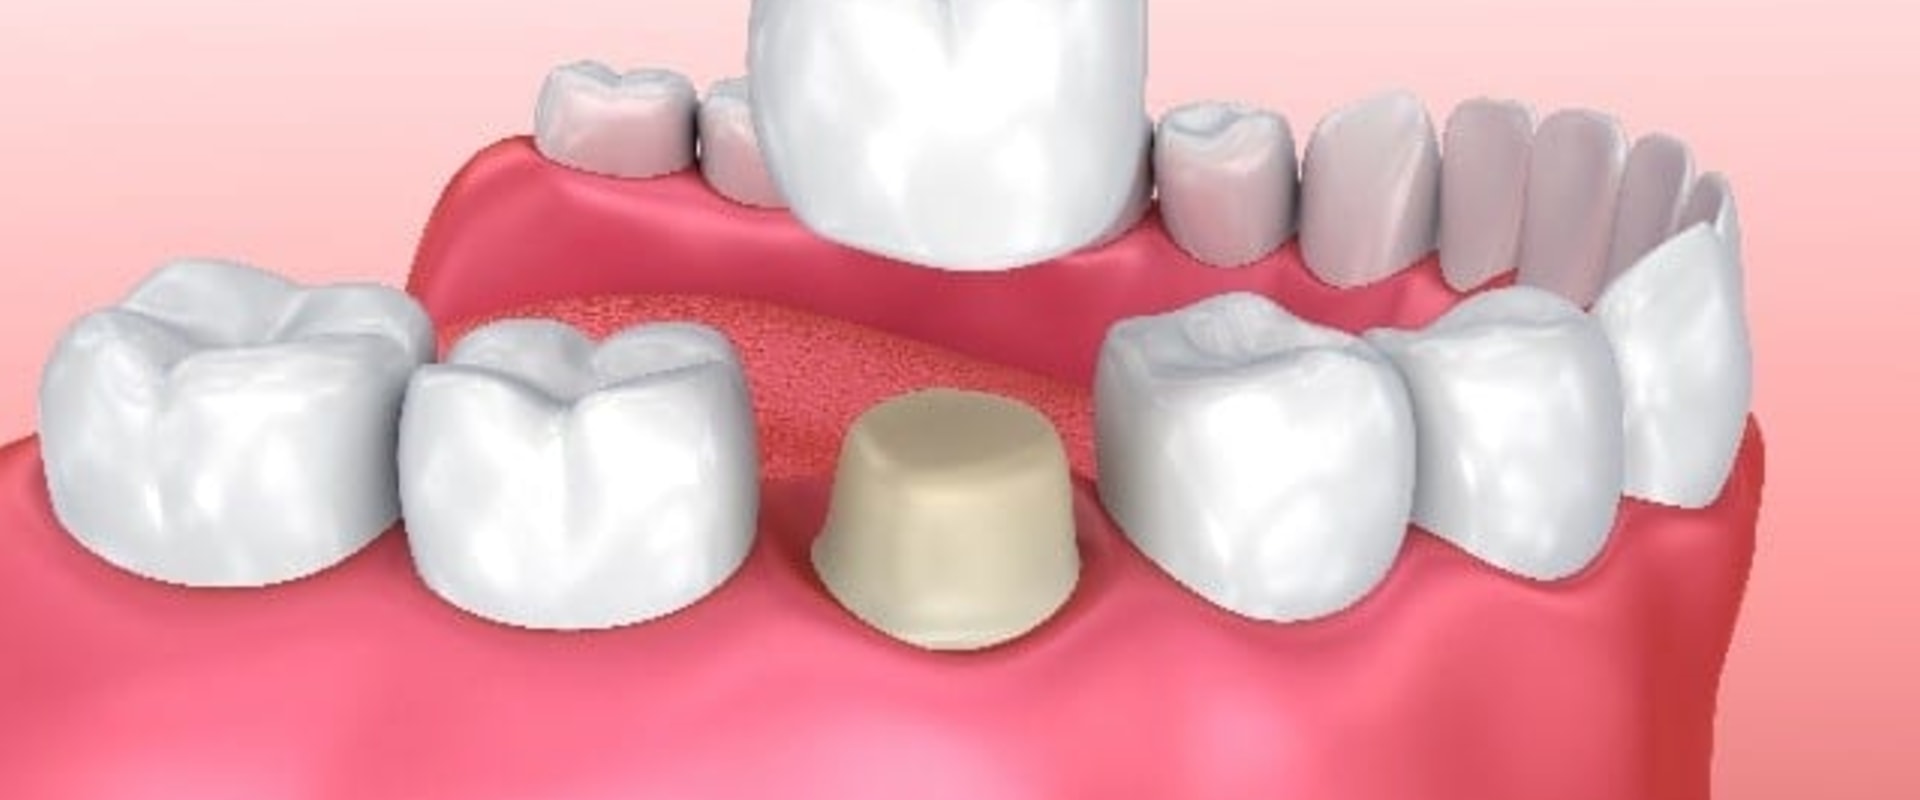 Can an Emergency Dentist Provide a Temporary Crown on the Same Day?